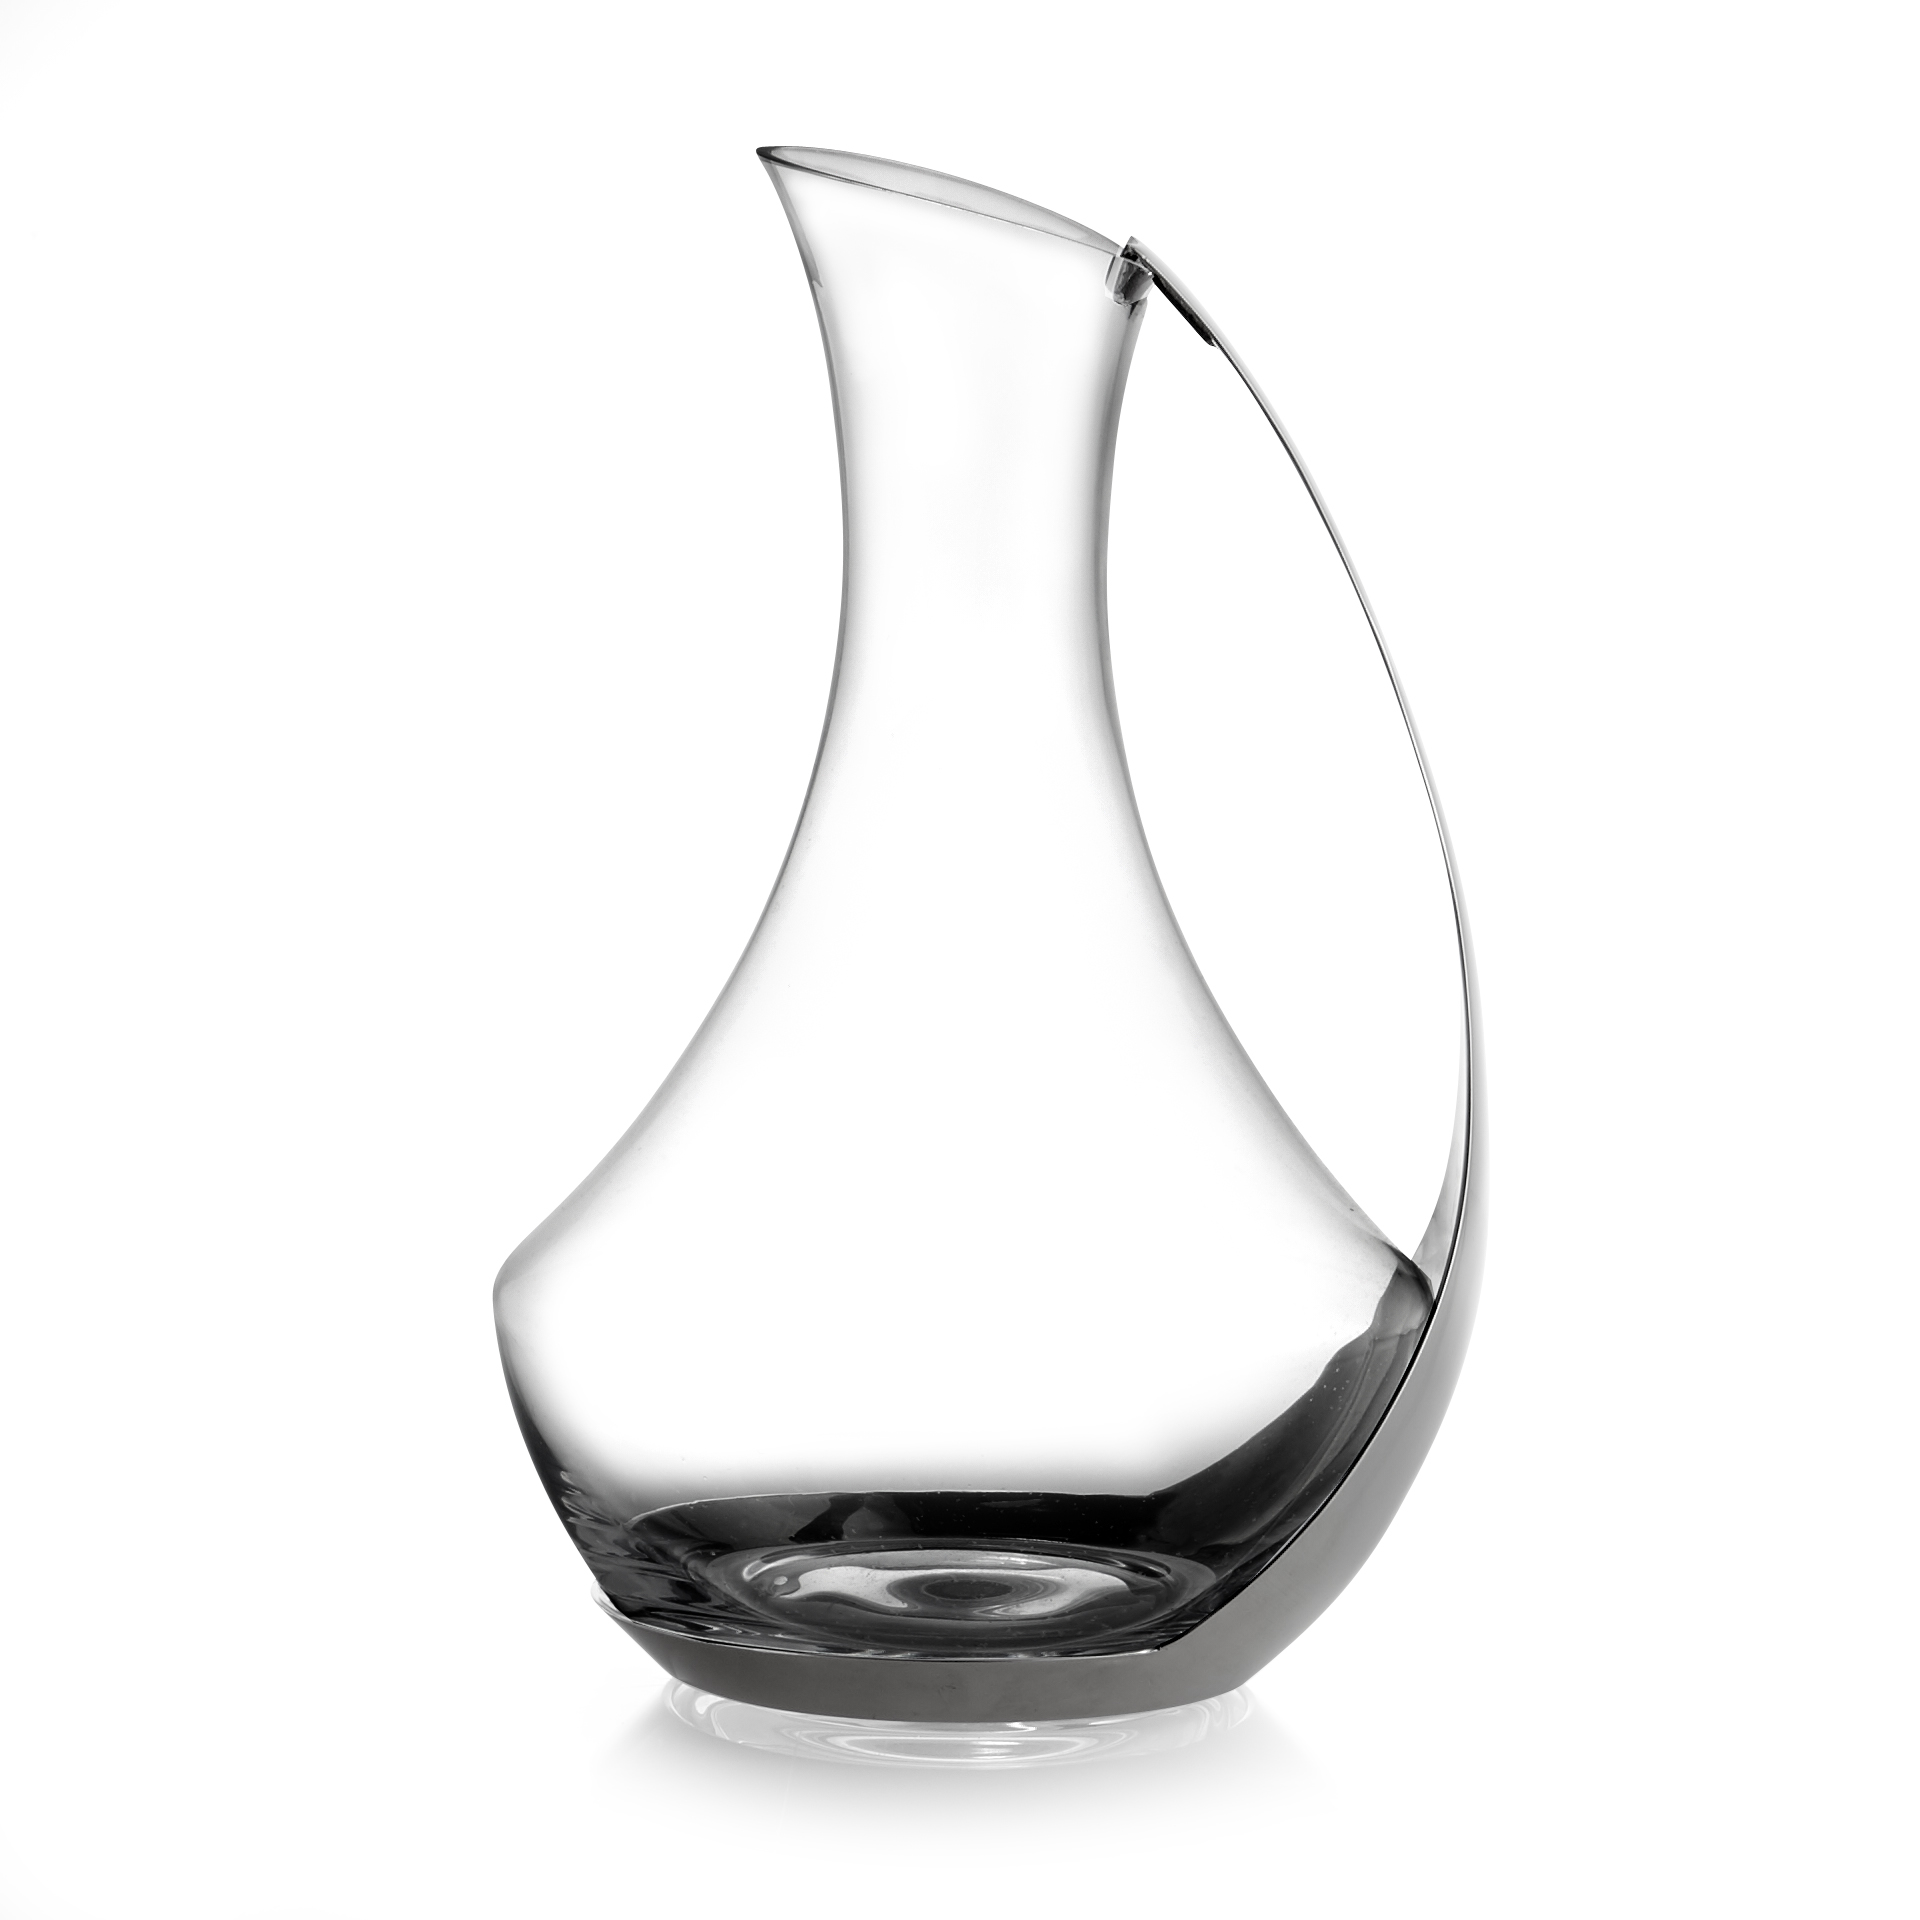 https://nambe.com/on/demandware.static/-/Sites-master/default/dwfd91803e/products/large/MT1270_Vie_Wine_Pitcher.jpg